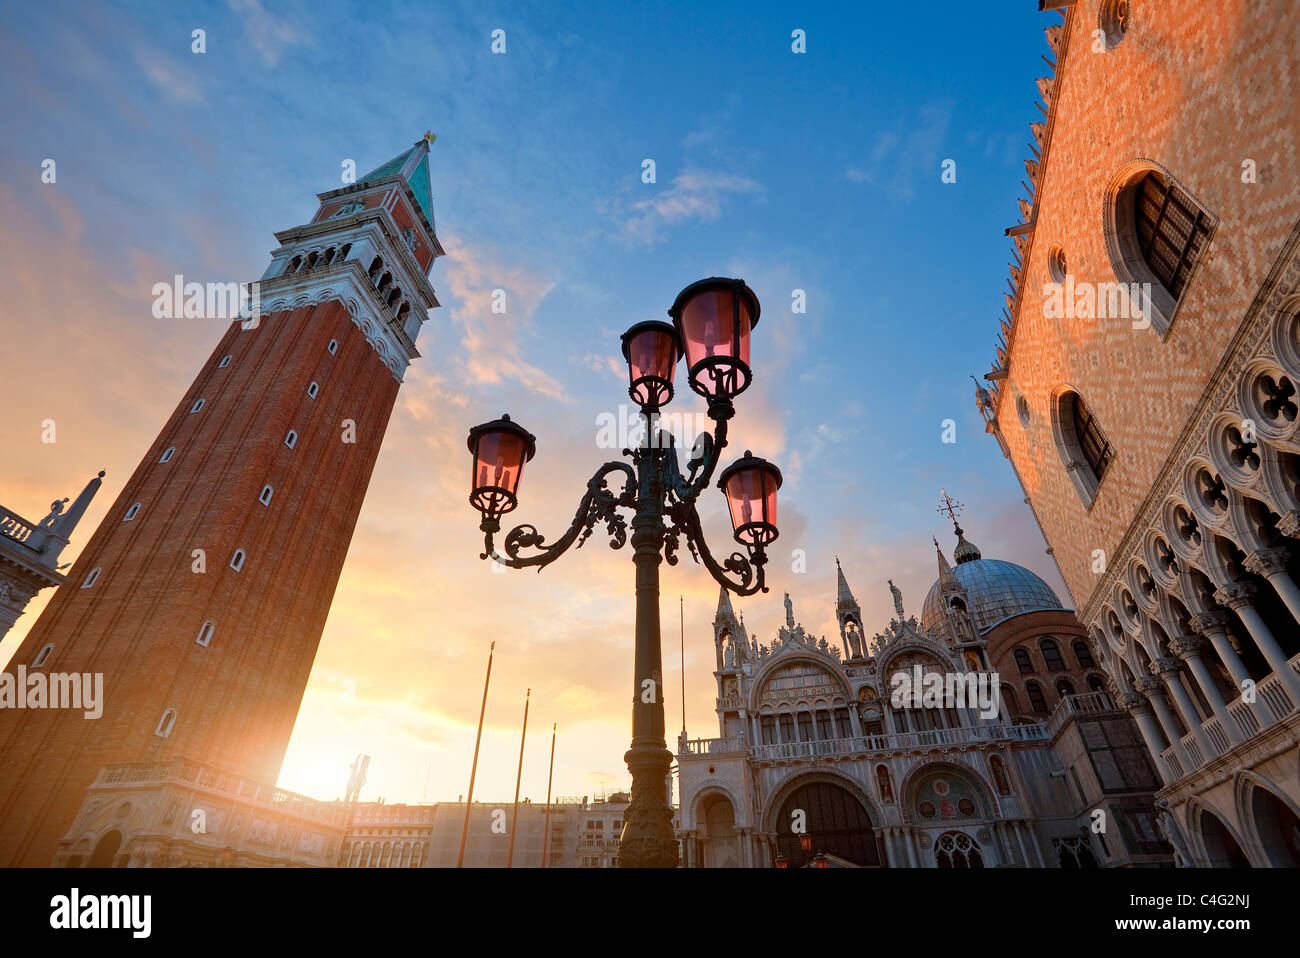 Venice,  Piazza San marco at Sunset Stock Photo